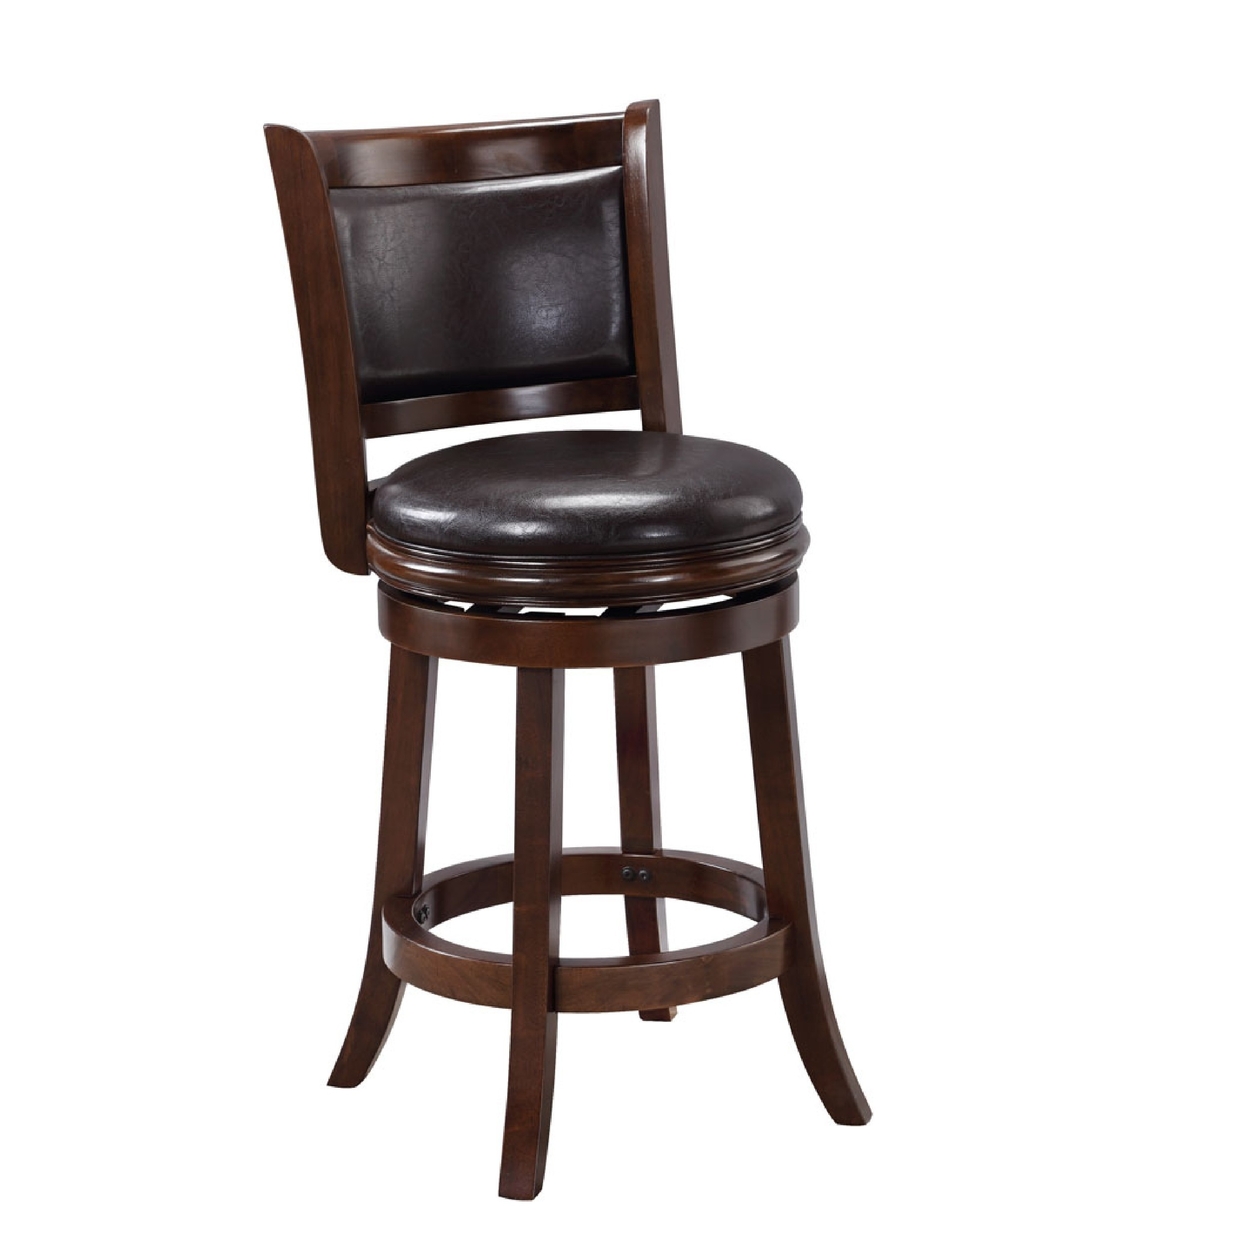 Pal 24 Inch Swivel Counter Stool, Solid Wood, Faux Leather, Espresso Brown- Saltoro Sherpi